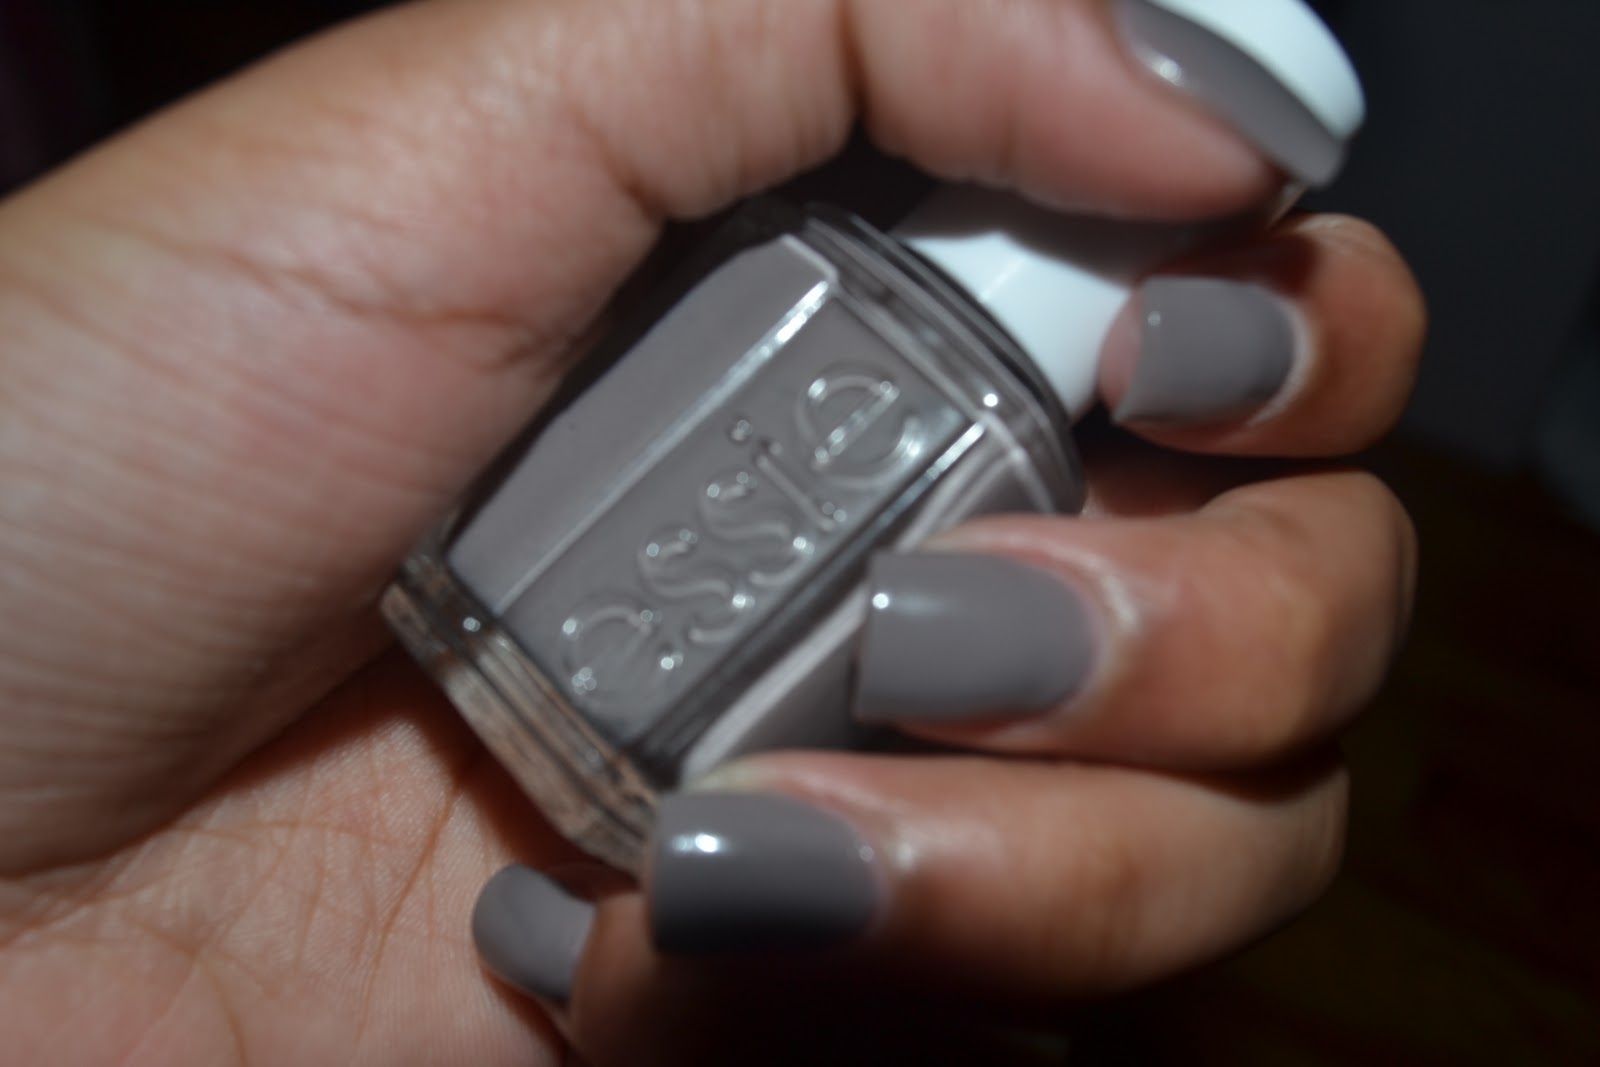 2. Essie Nail Polish in "Chinchilly" - wide 5